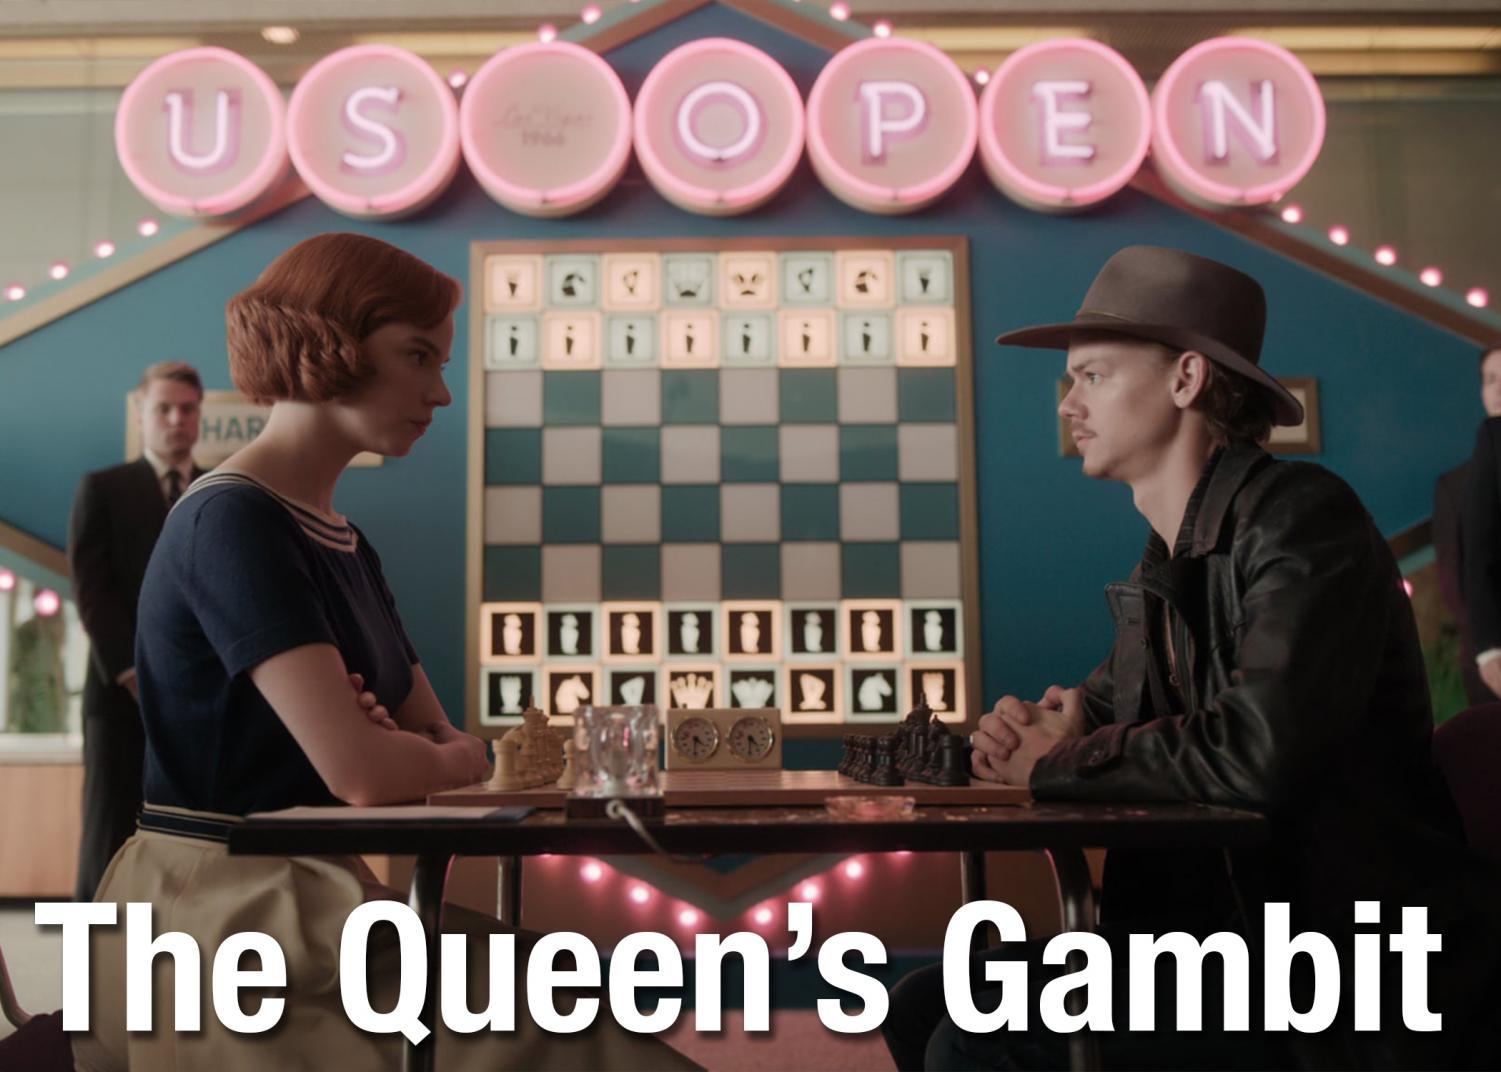 Queen's Gambit: 10 Reasons to Play It - TheChessWorld